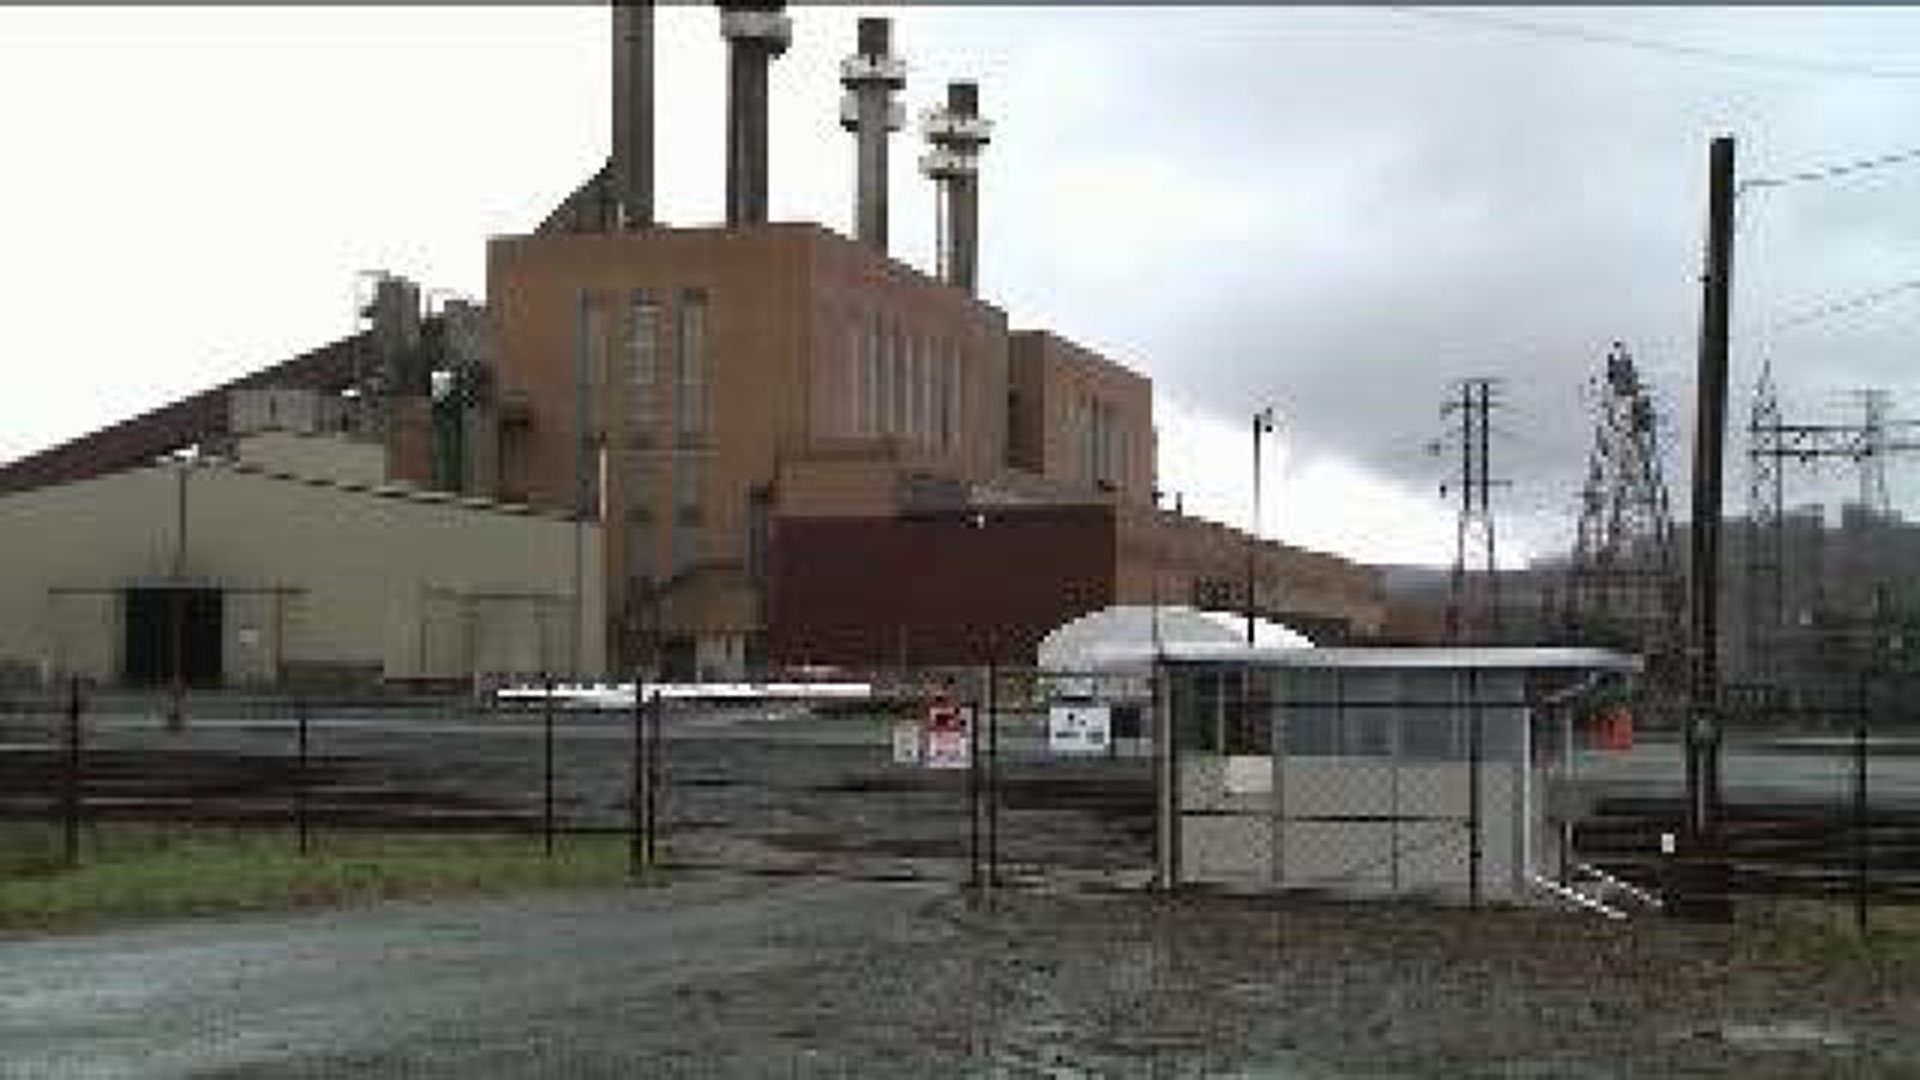 Casualty of Coal: One of Two Major Coal-Fired Electric Plants to Close